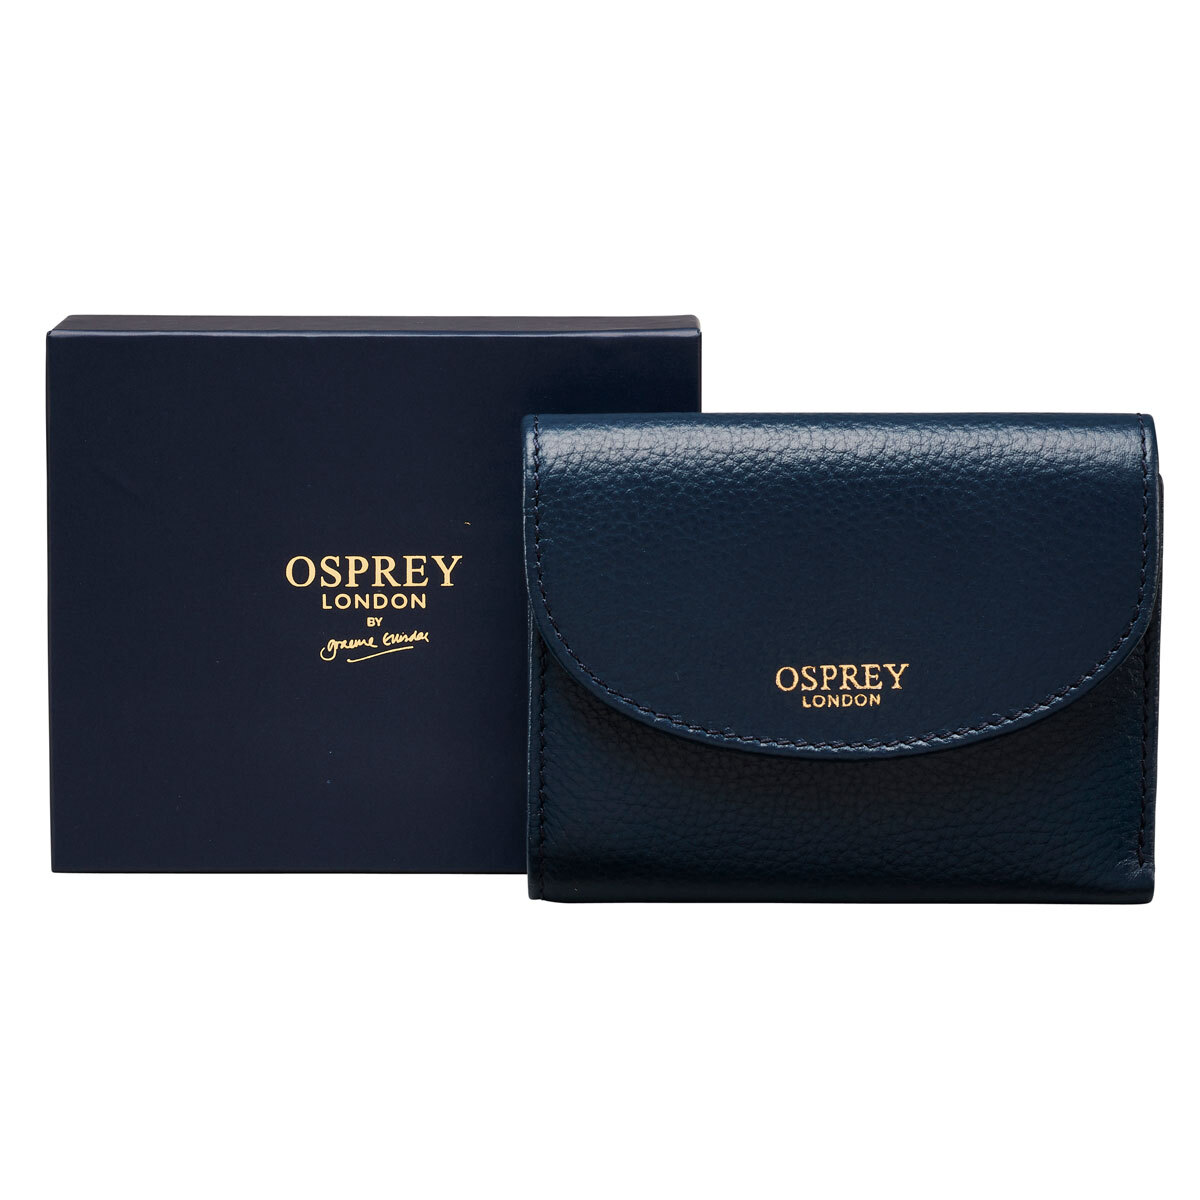 Osprey London Tilly Grainy Hide Leather Women's Purse, Navy with Gift Box